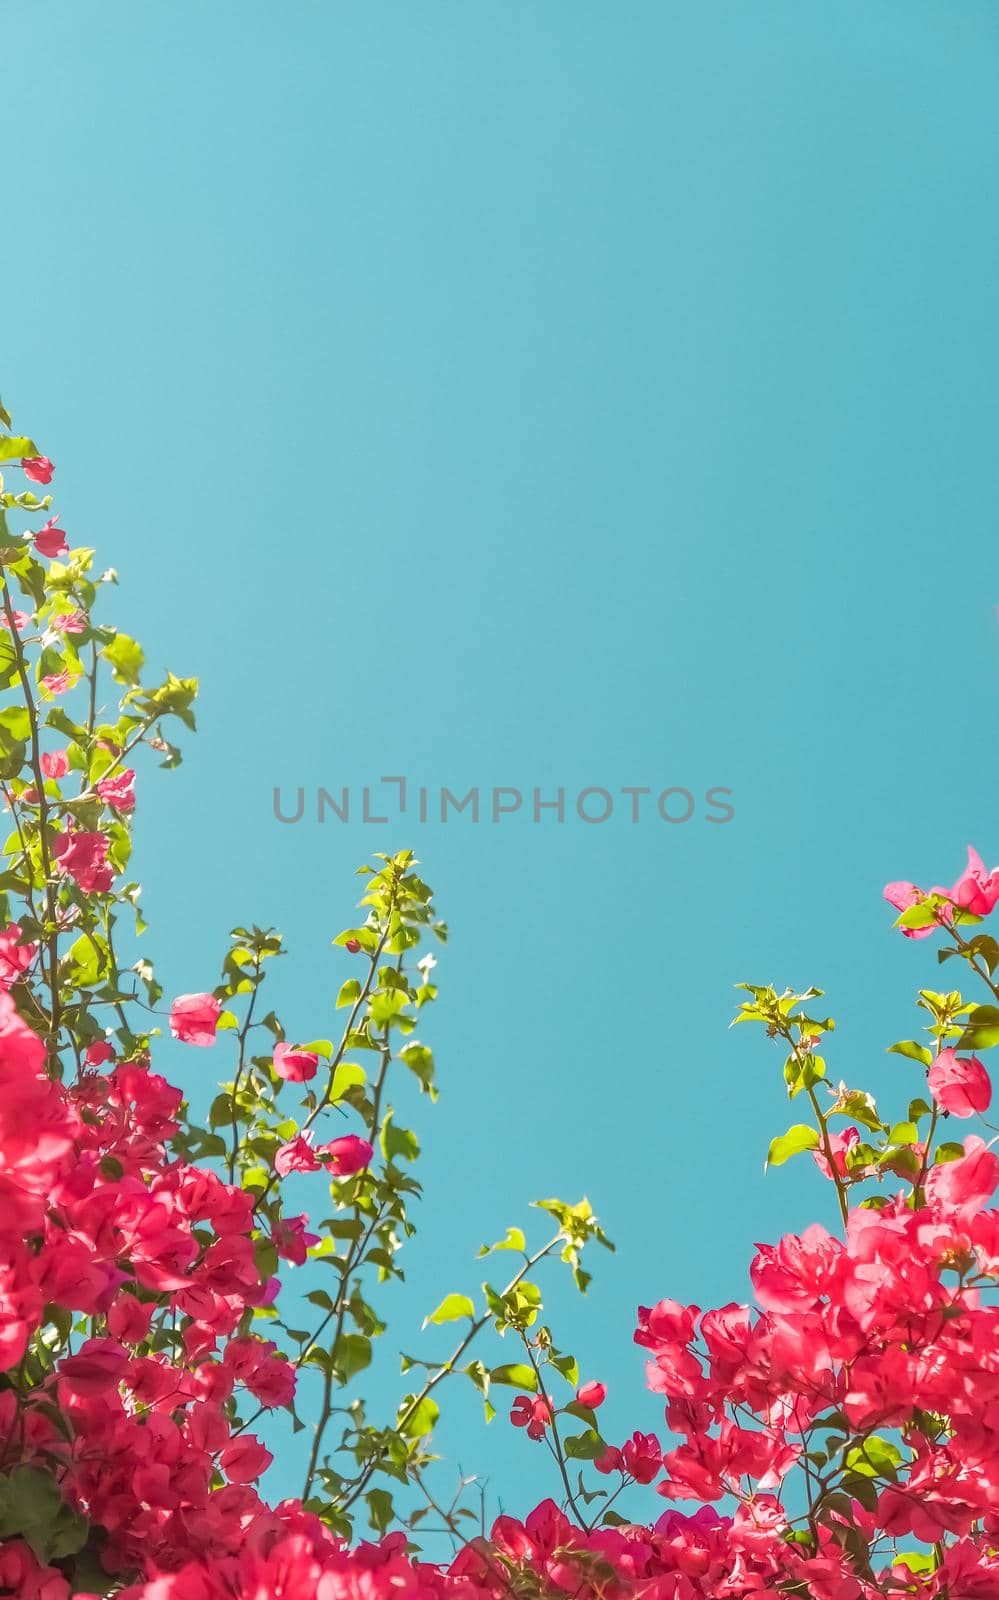 Coral blooming flowers and blue sky, feminine style background by Anneleven